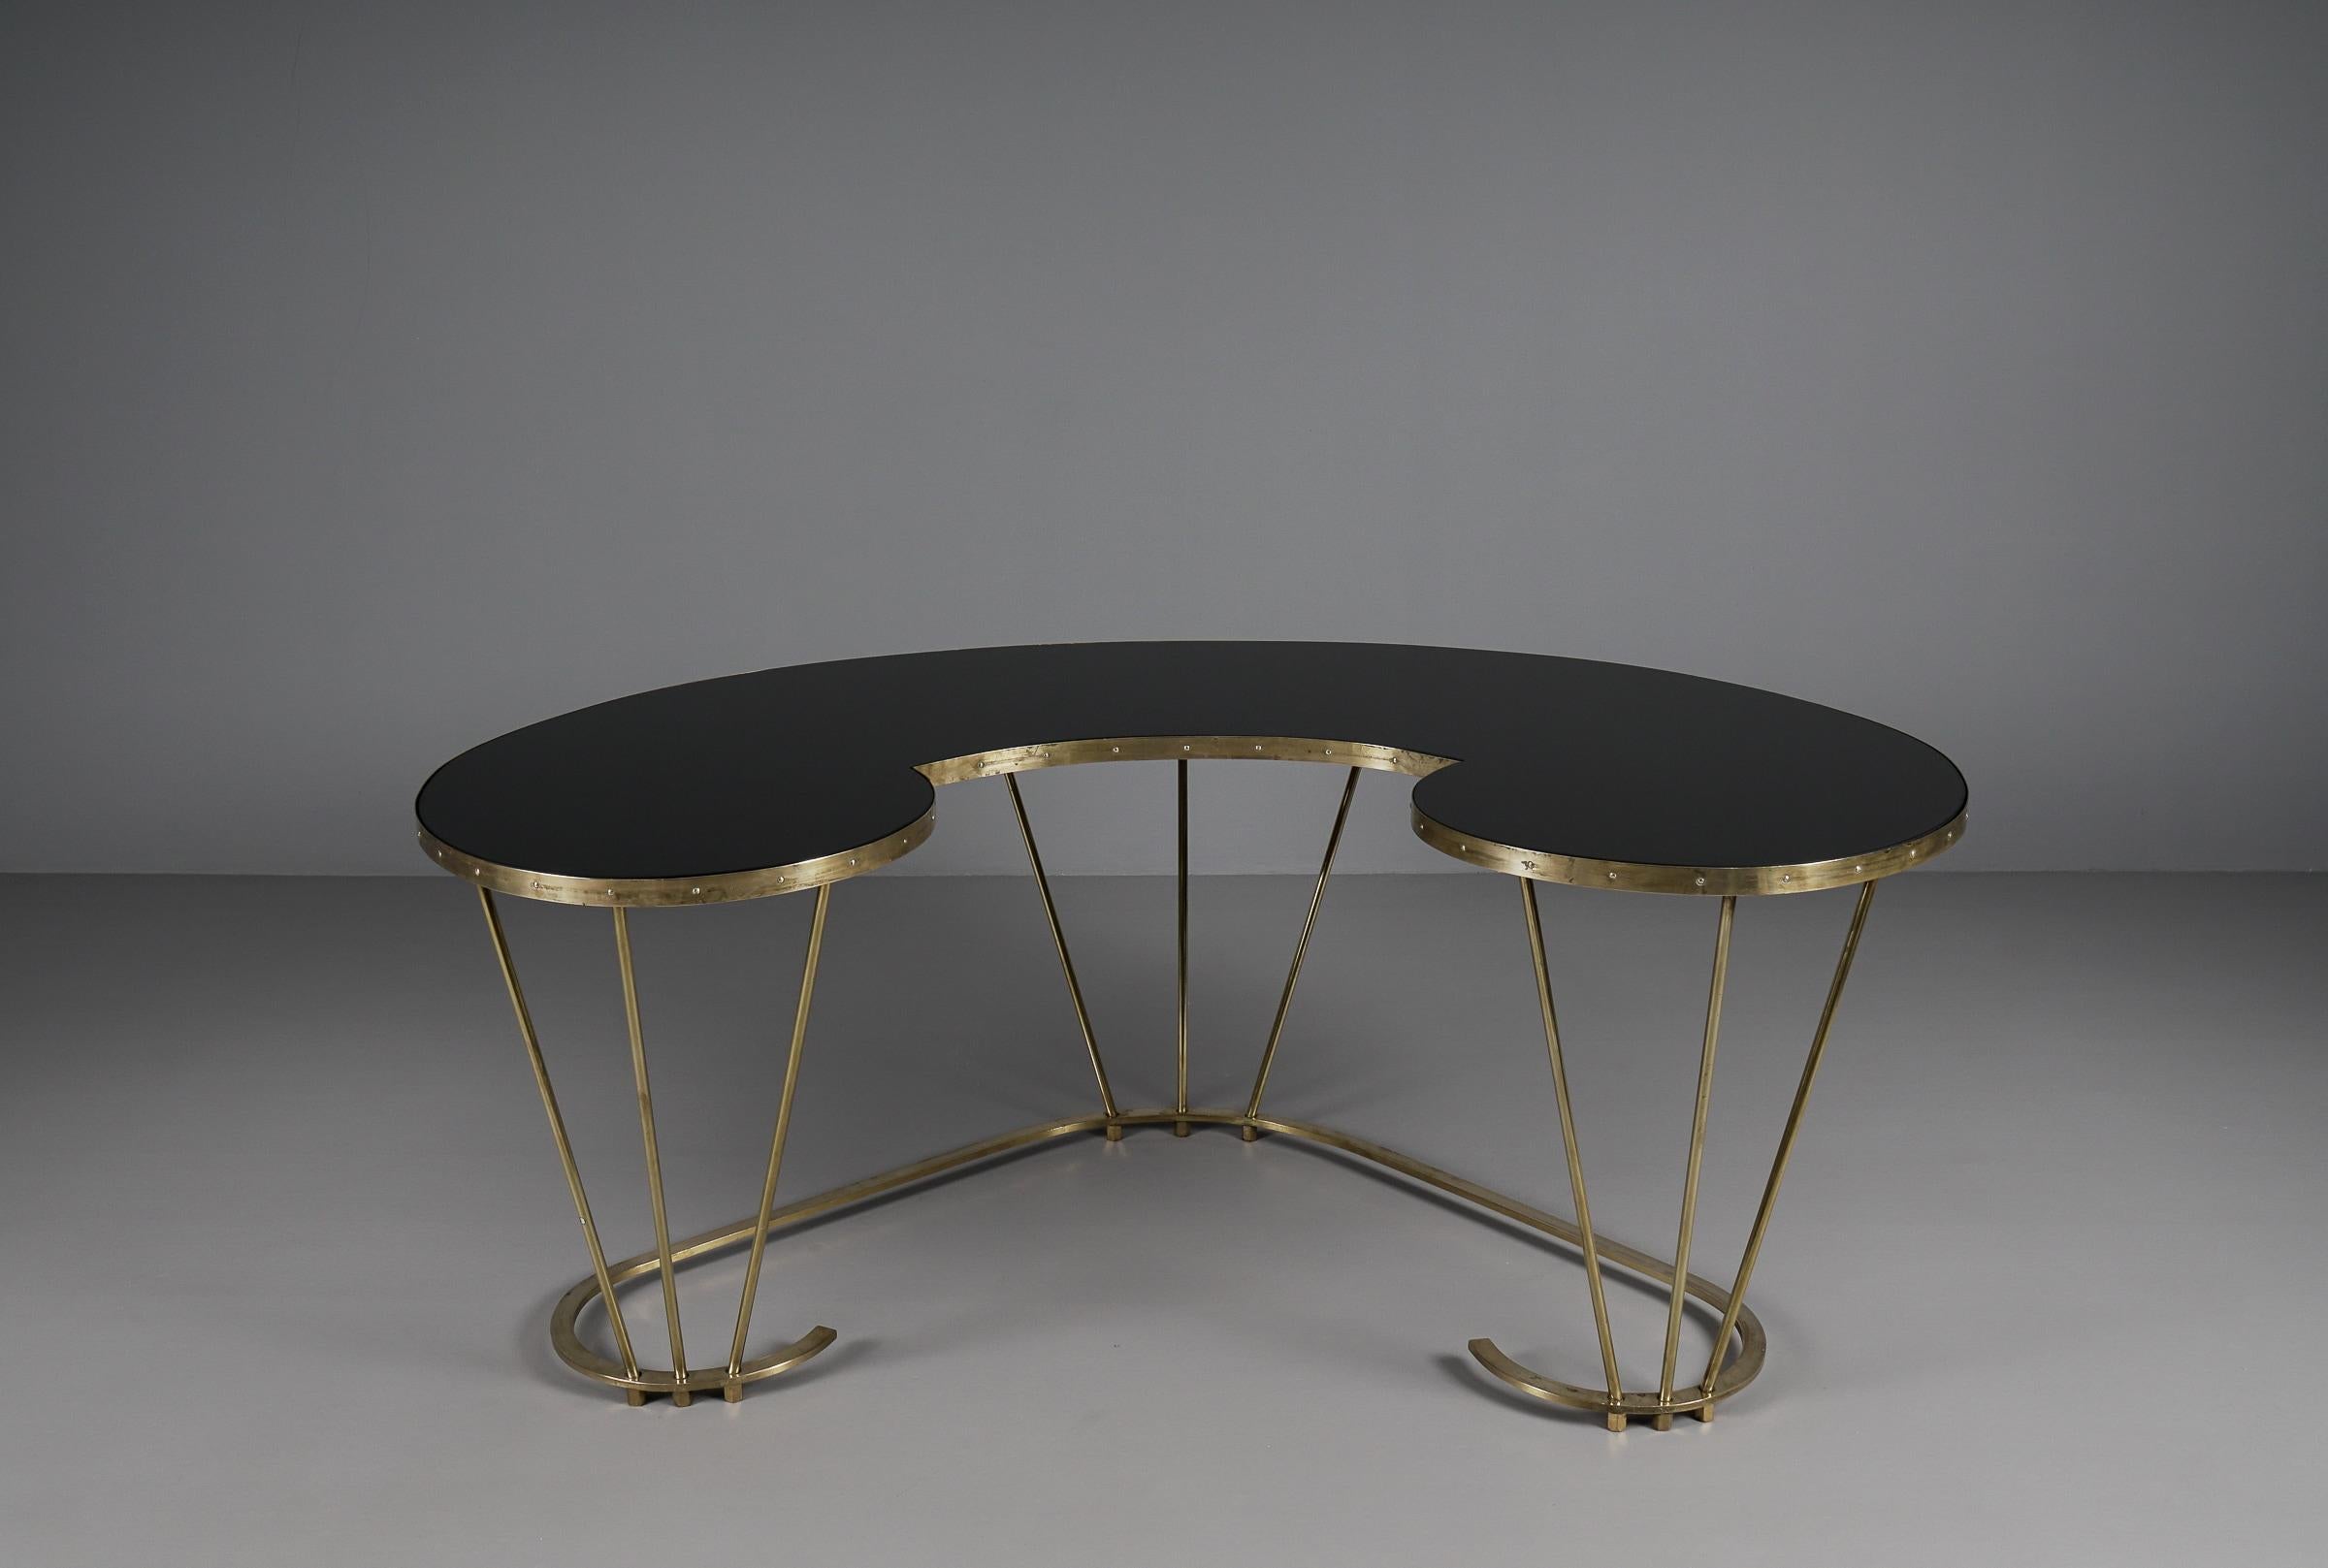 Mid-20th Century Unique Desk or Dressing Table Made of Solid Brass and Black Glass, 1950s, Italy For Sale